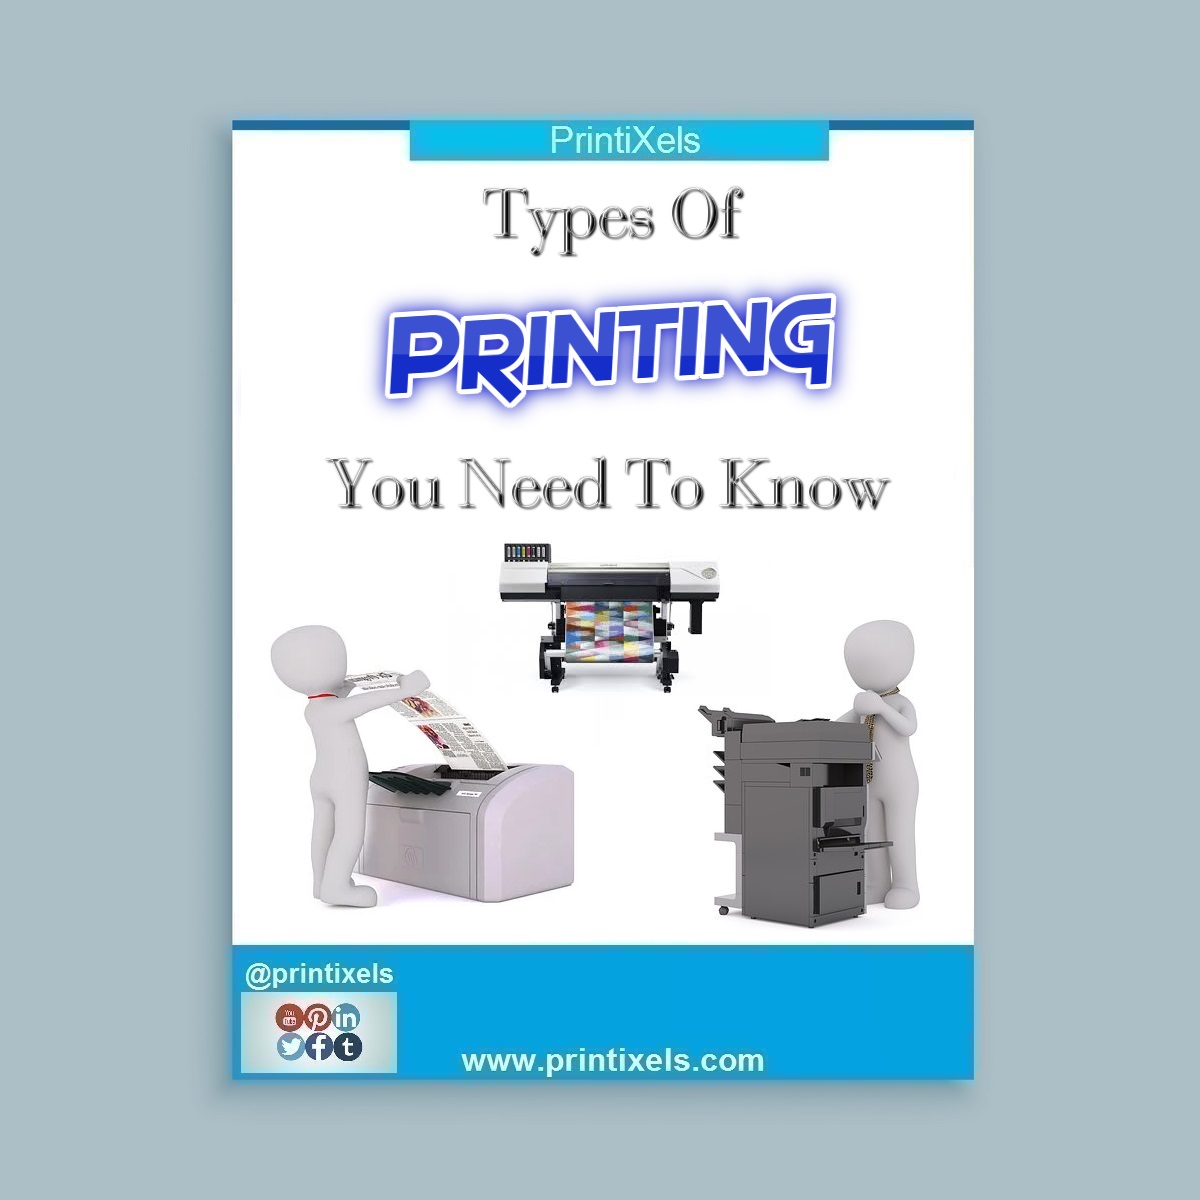 Types Of Printing You Need To Know